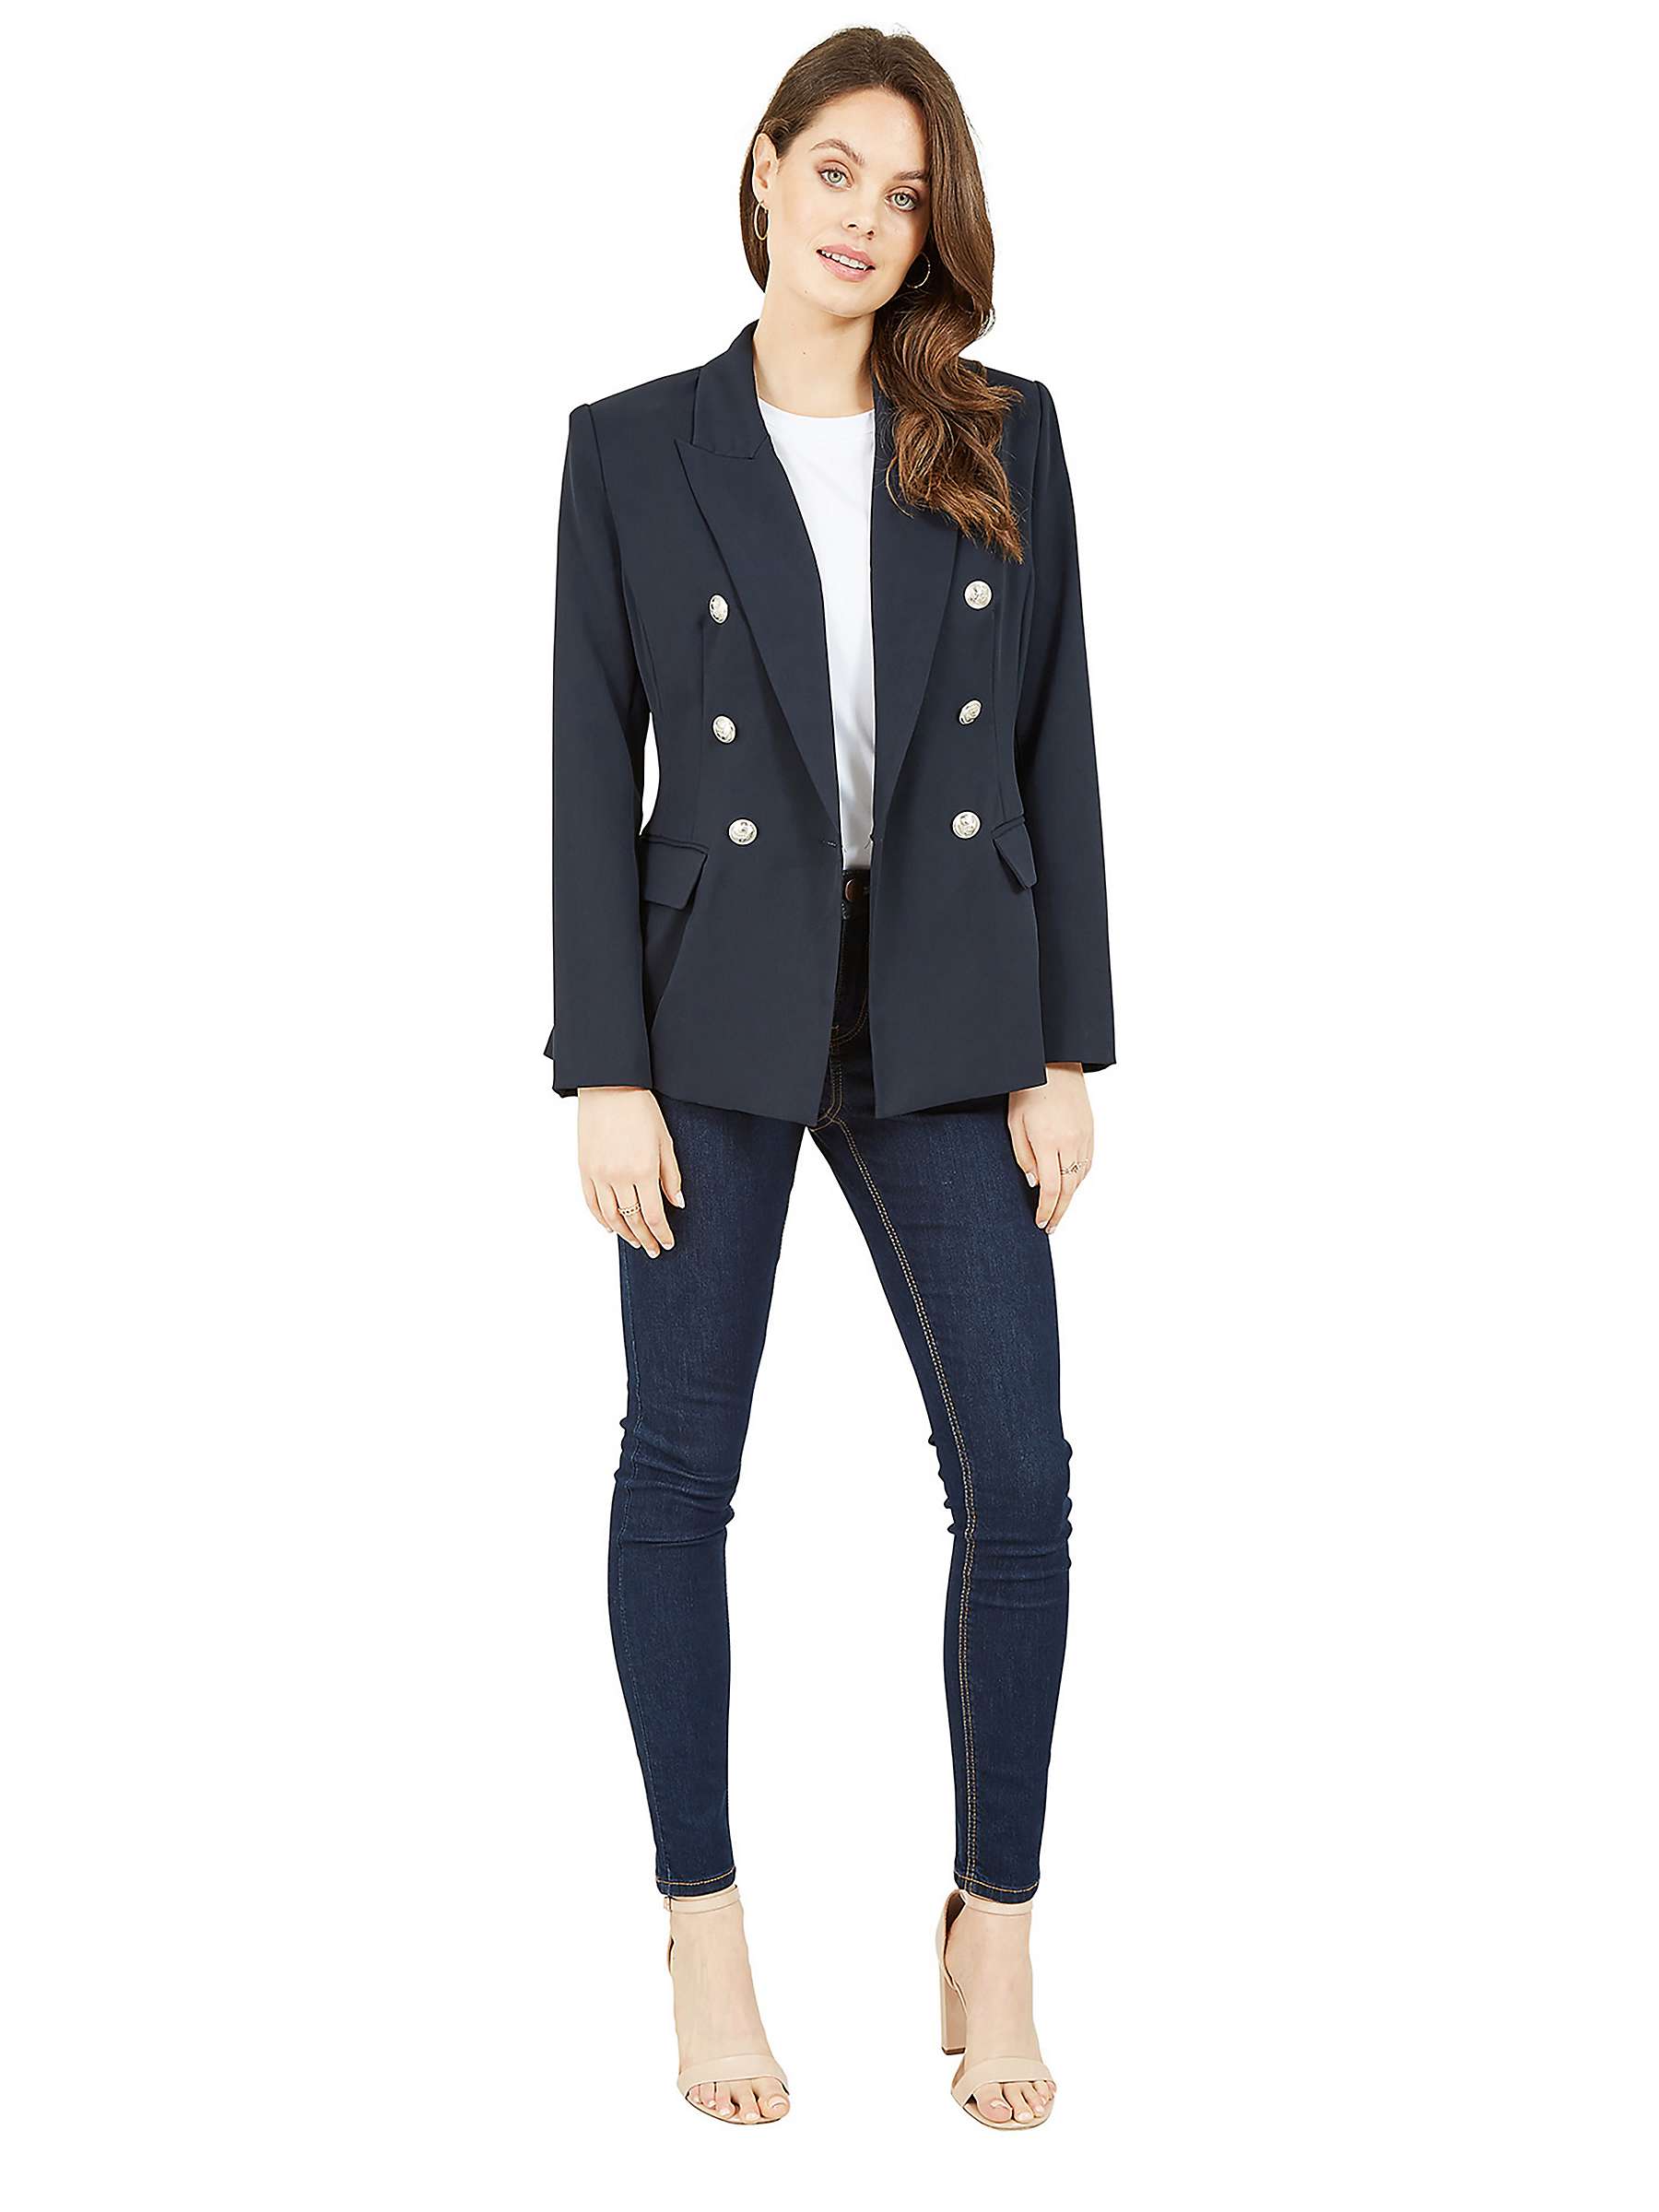 Buy Yumi Double Breasted Blazer Online at johnlewis.com